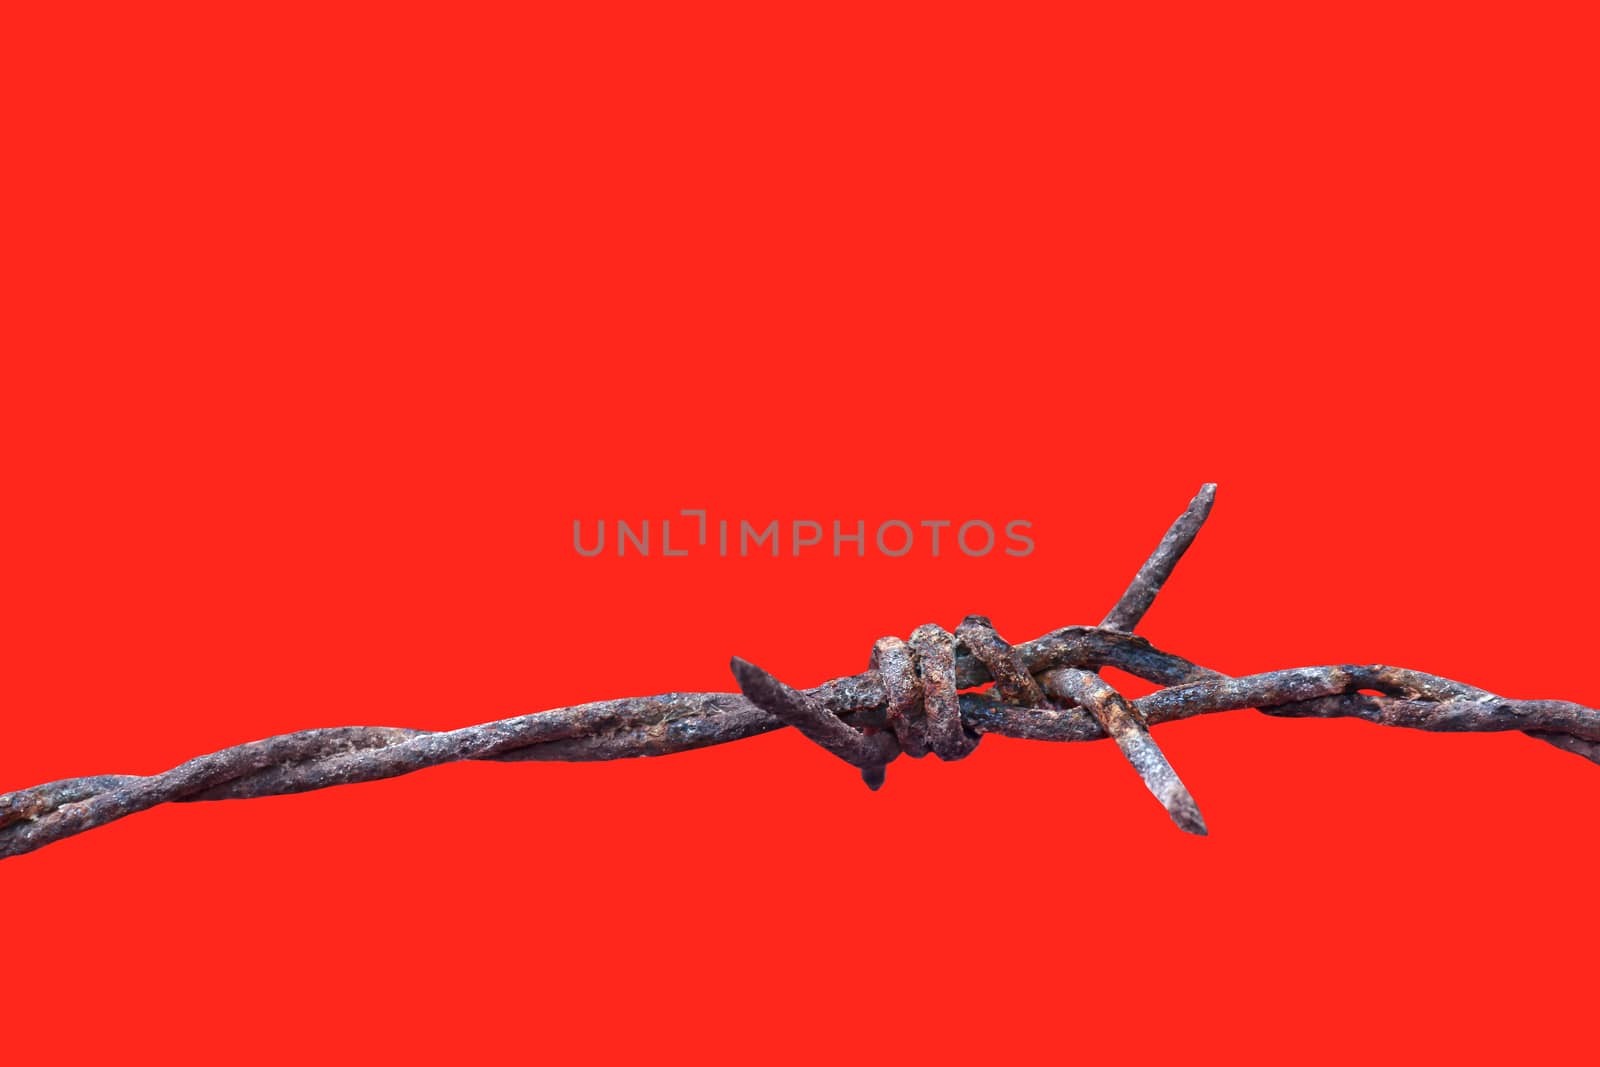 barbed wire rust old isolated on red background, barbed wire rusty meaning to incarcerate, imprison, detention center, incarceration